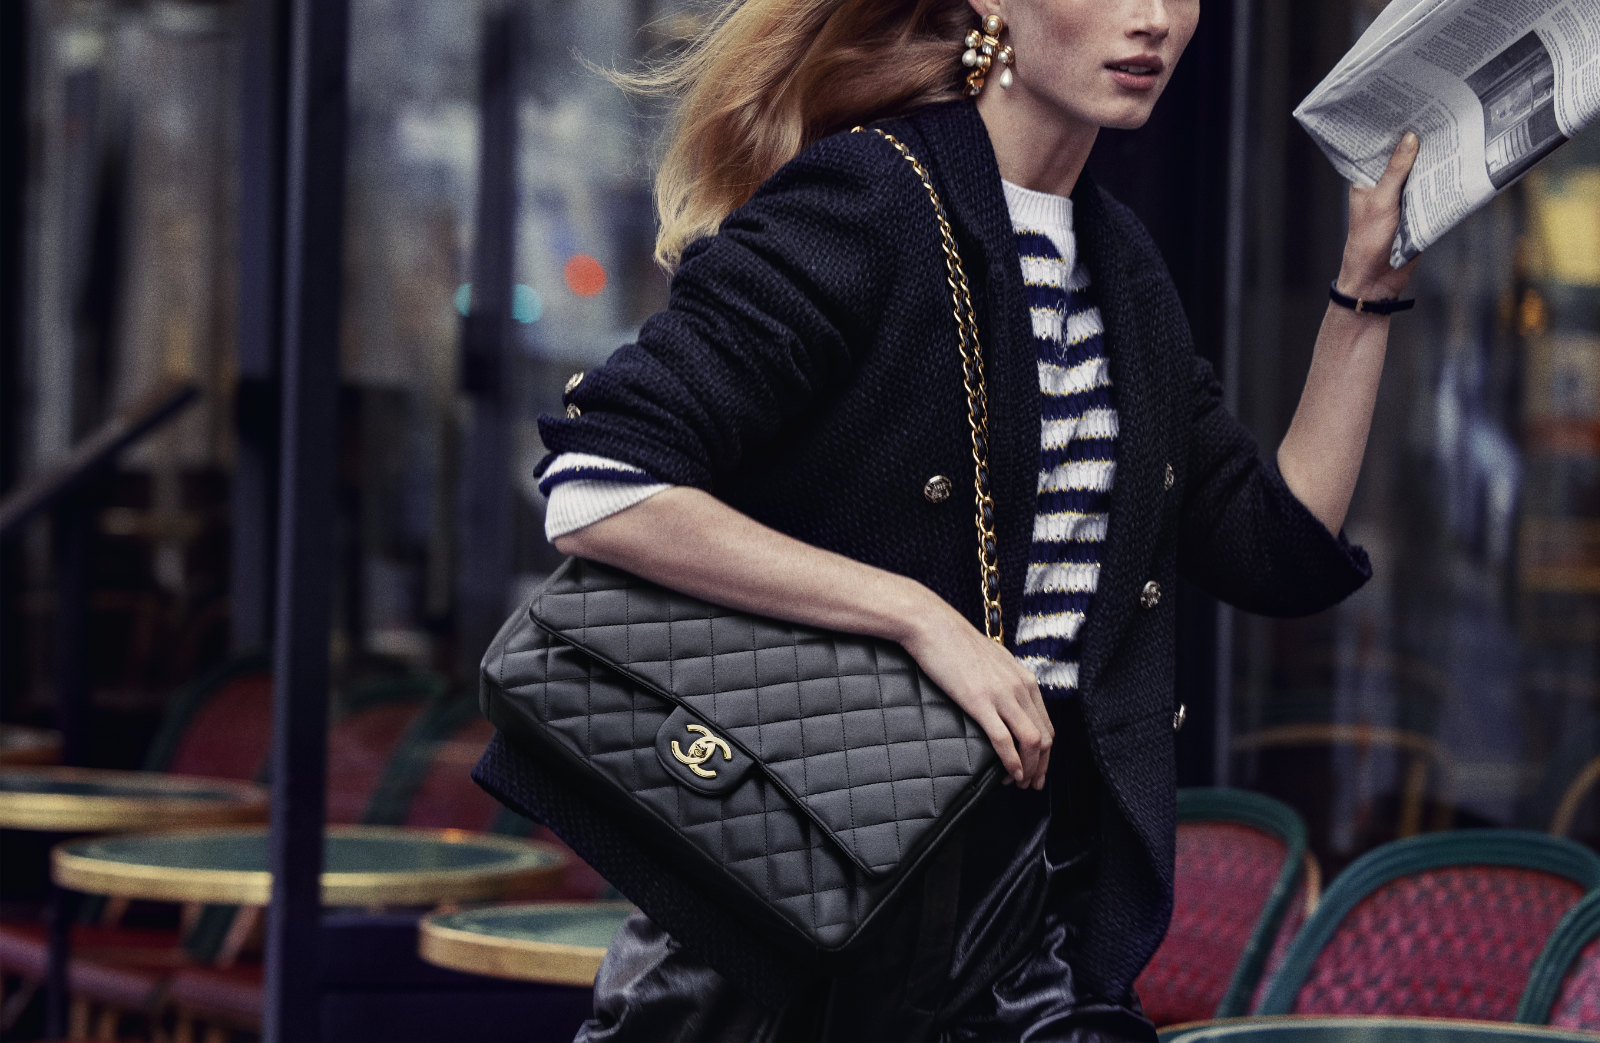 Chanel promotes 11.12 bag in campaign shot by Inez & Vinoodh – Lucire